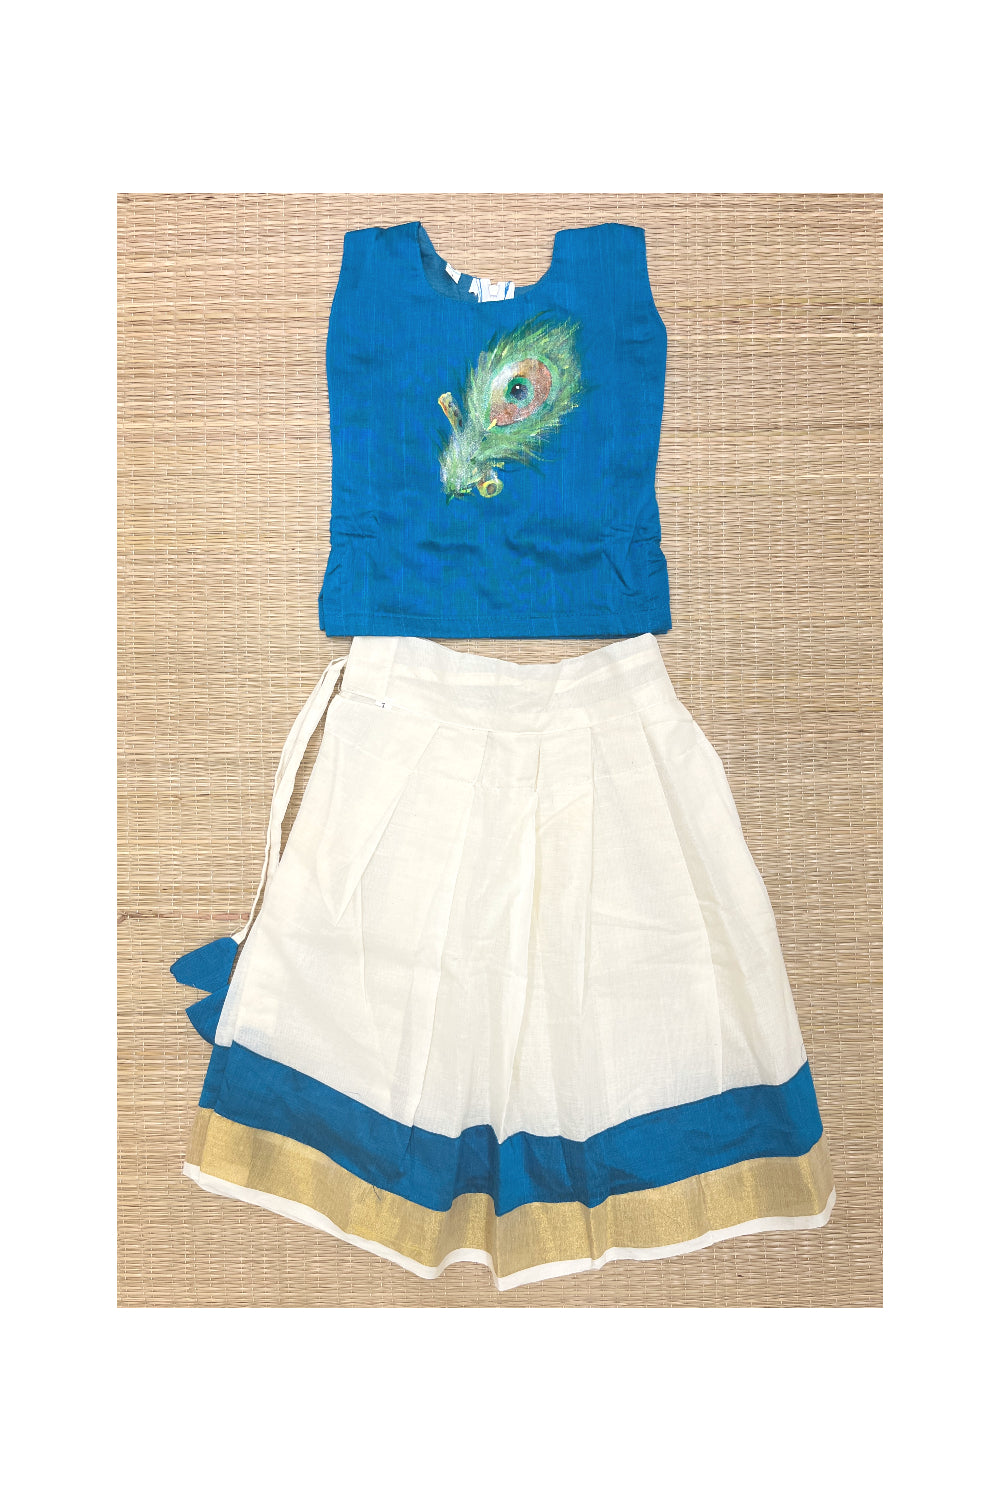 Southloom Kerala Pavada Blue Blouse with Feather Mural Designs (Age - 1 Year)